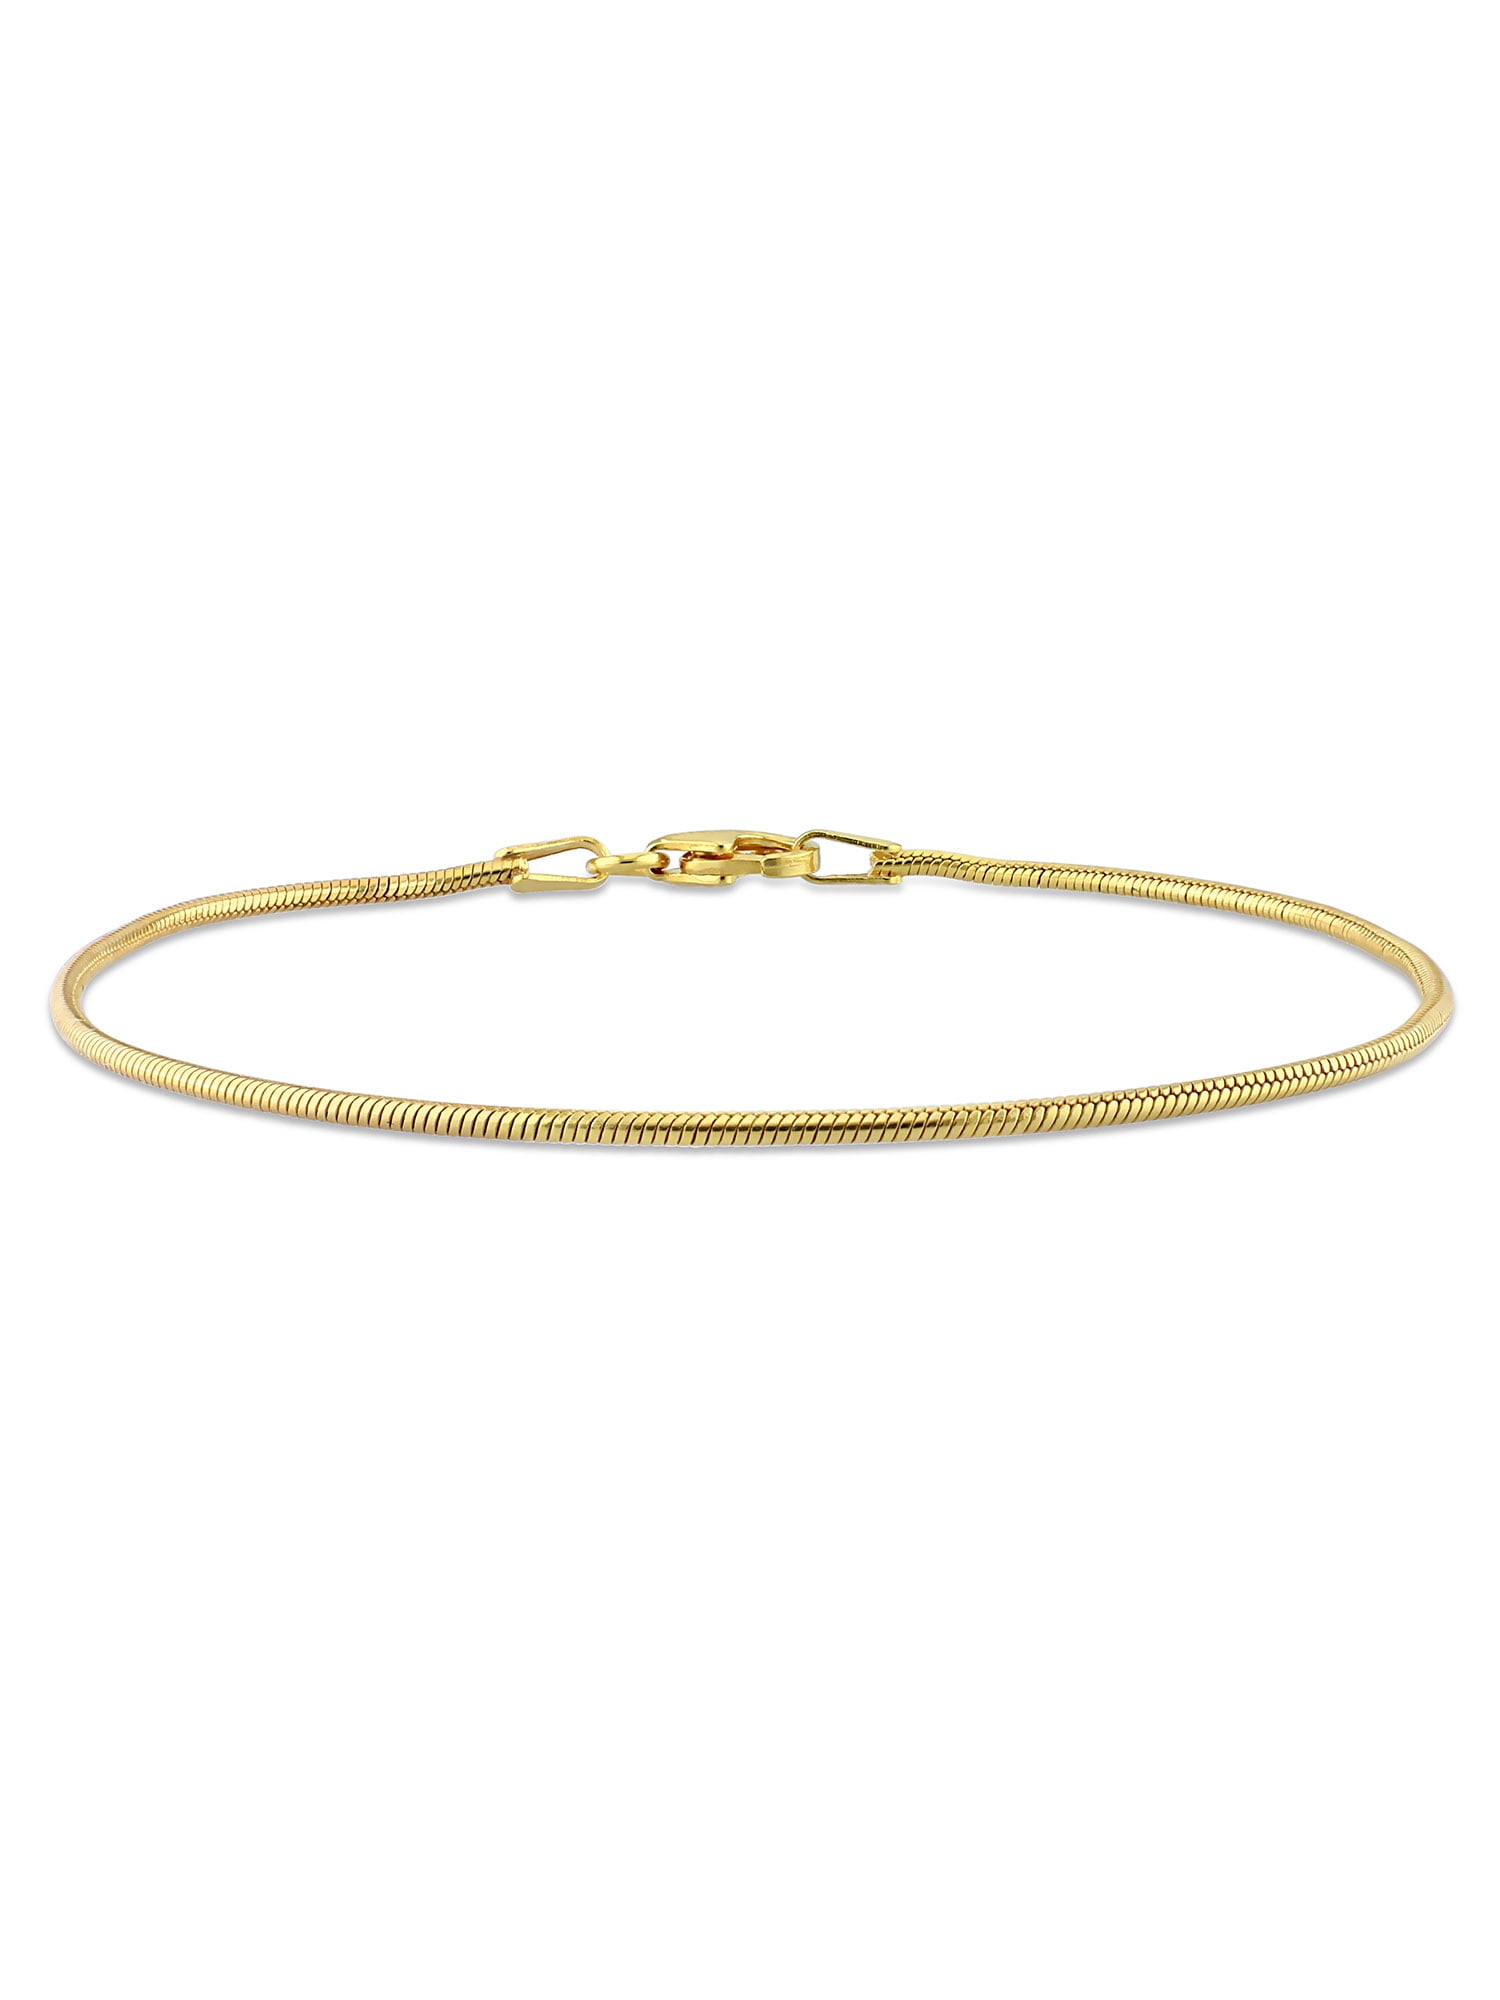 Yellow Gold Flash Plated Sterling Silver Snake Chain Bracelet 